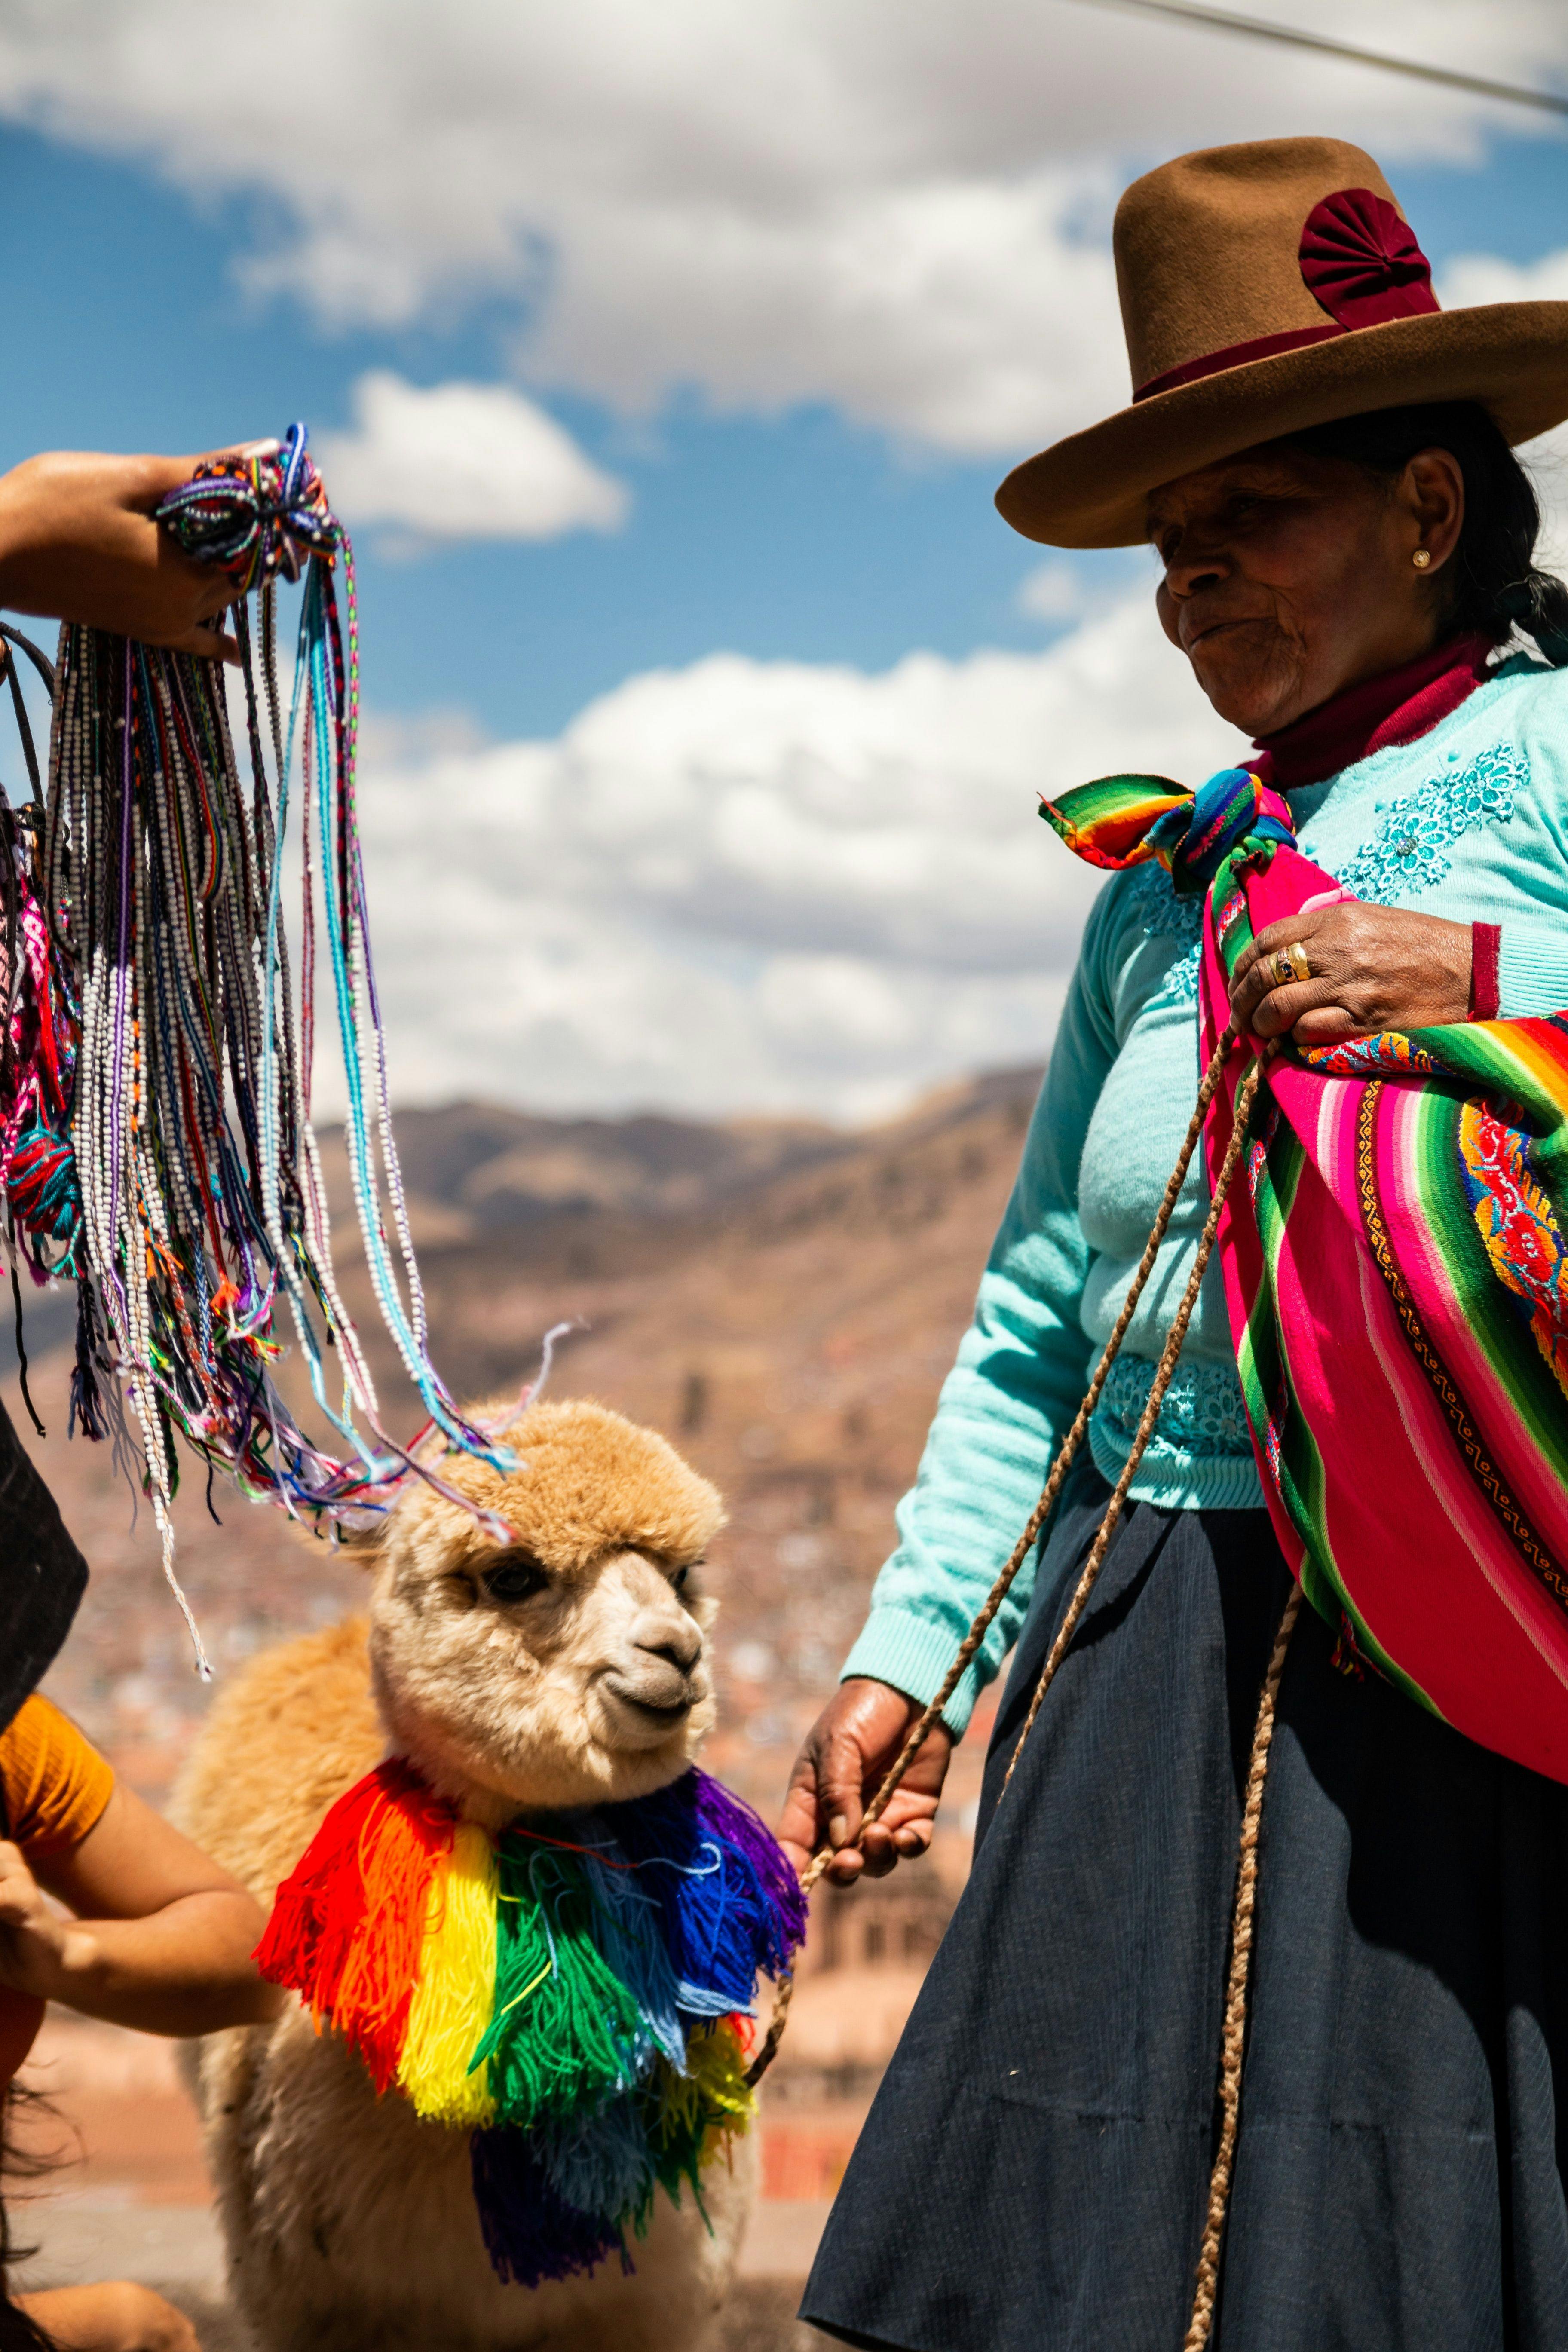 Woman in traditional clothing in Cusco Peru.